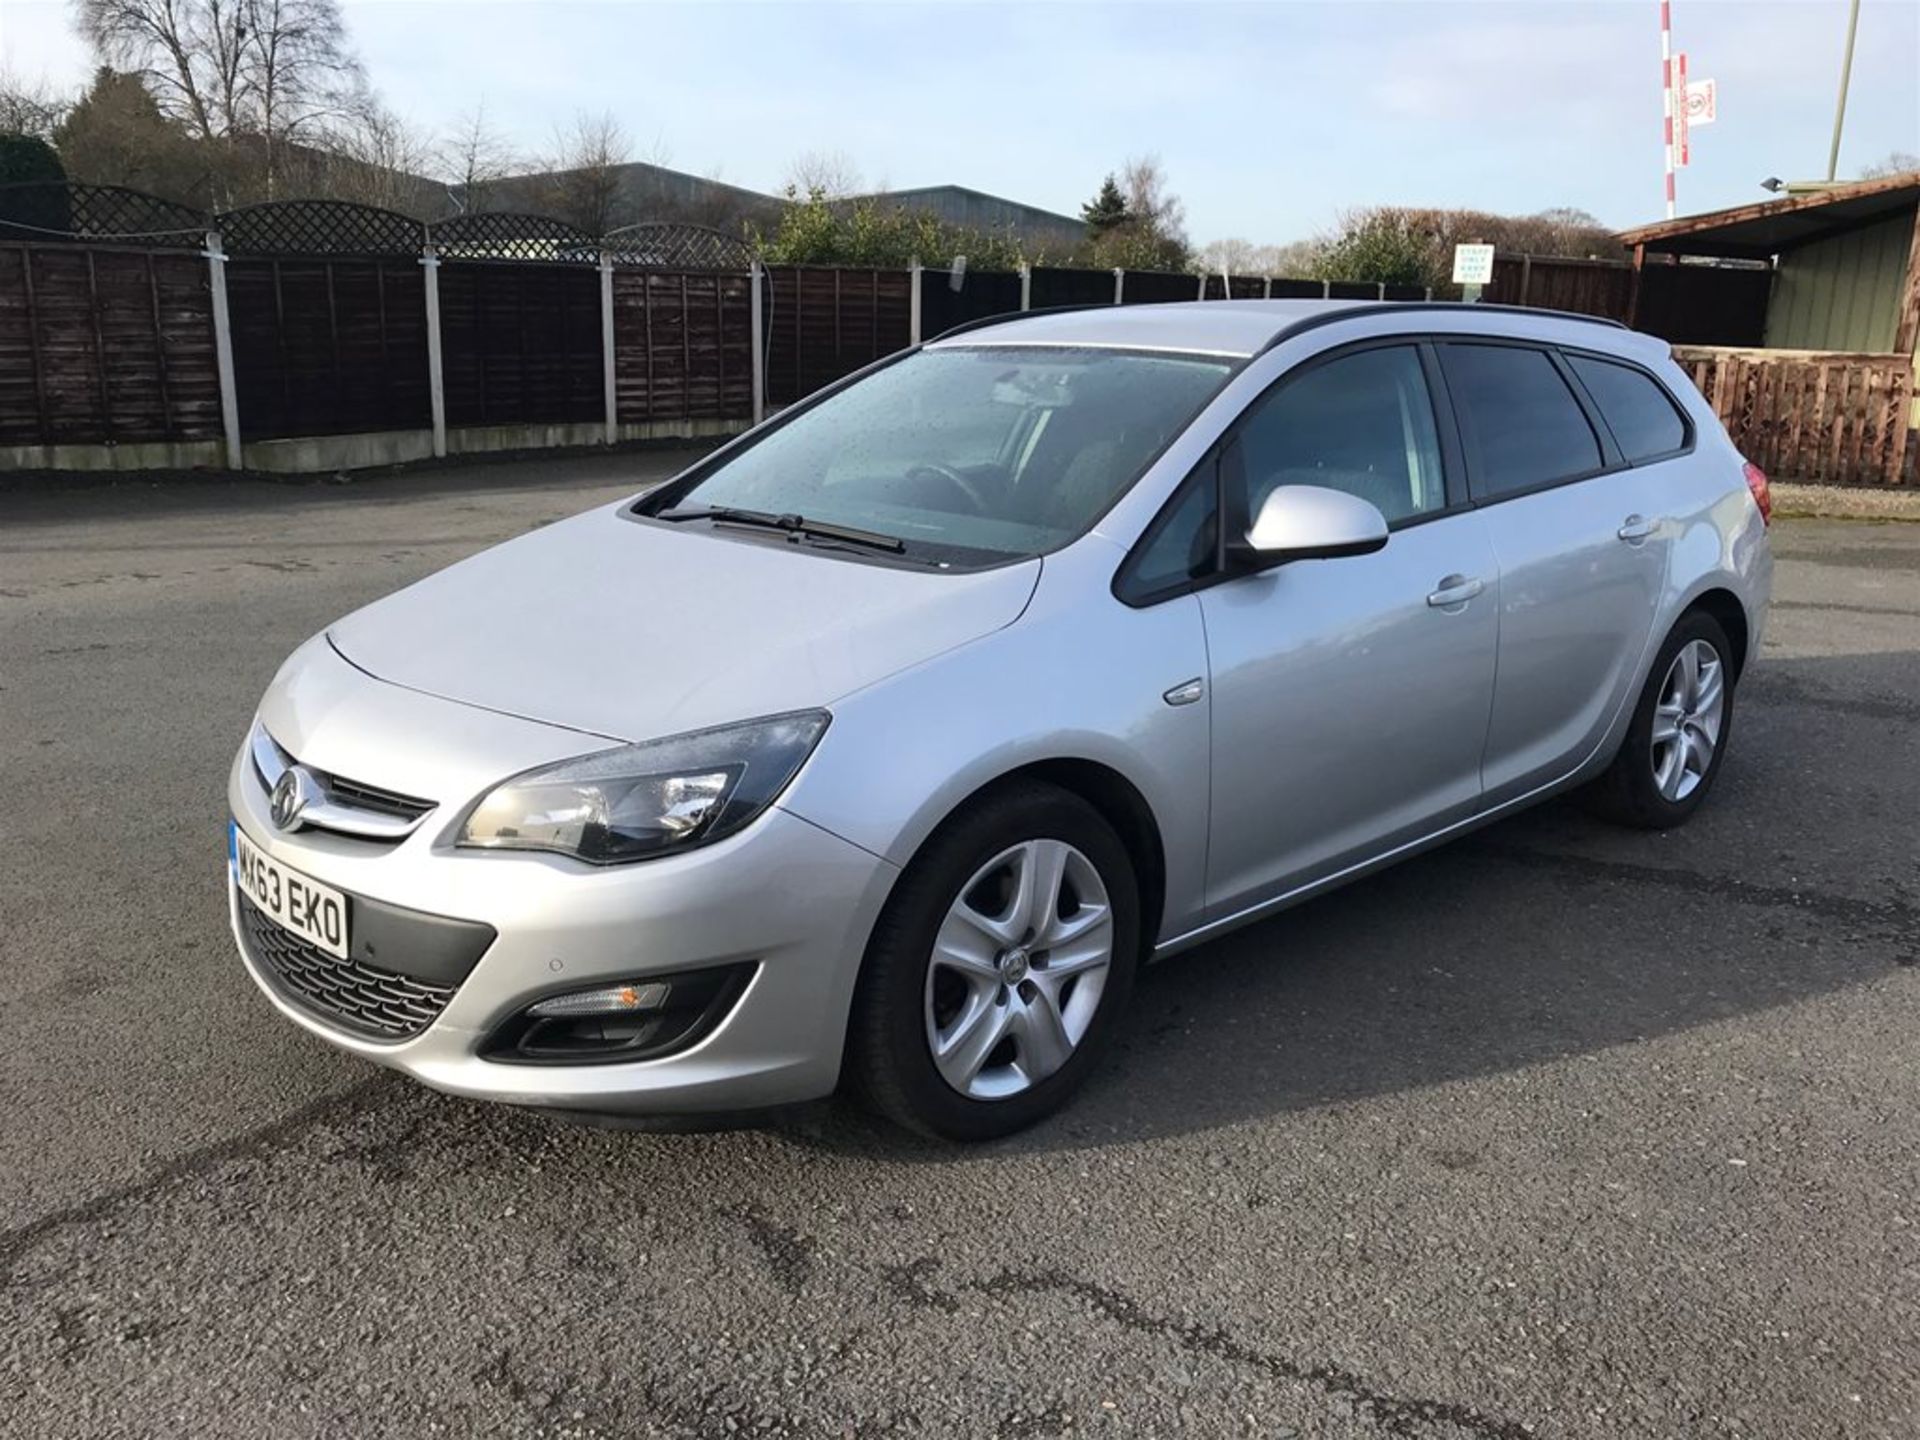 Vauxhall Astra 1.7 CDTi Exclusiv 110ps Estate Air Con - Image 3 of 8